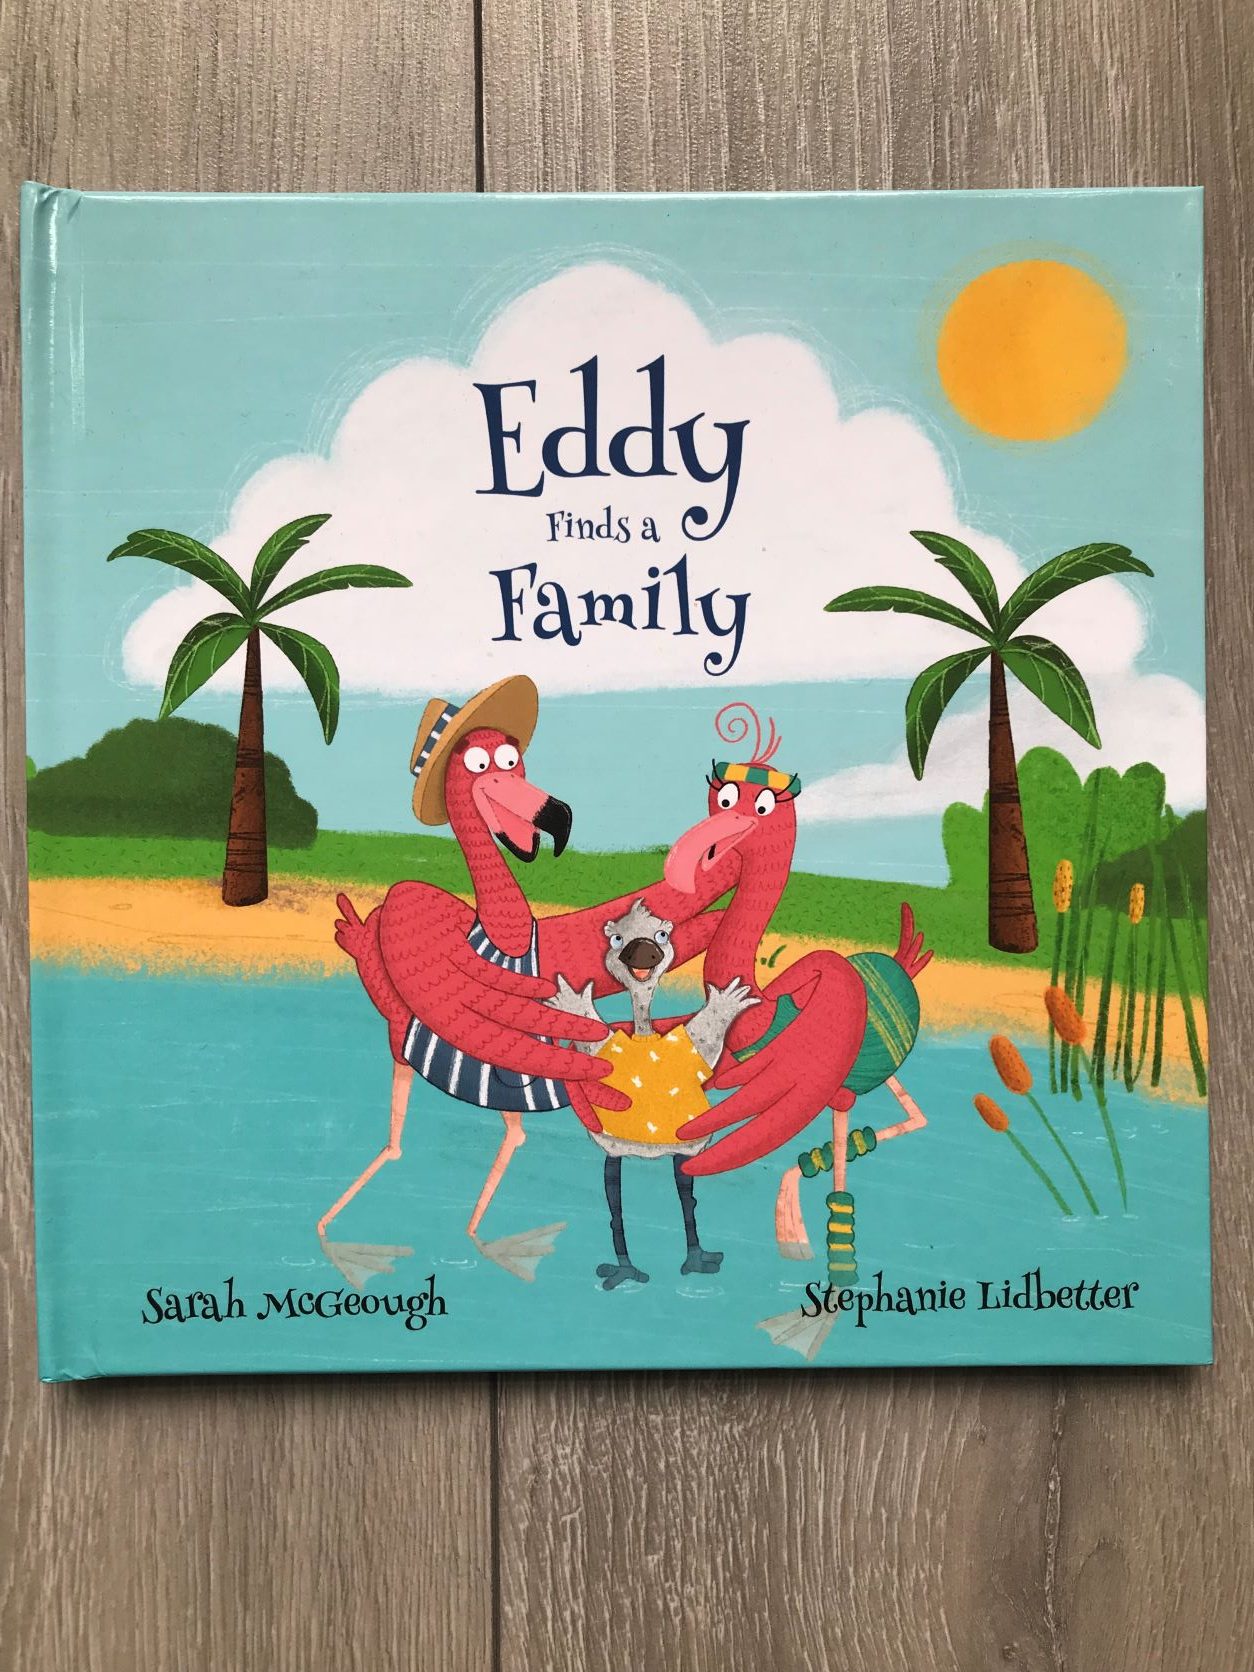 Eddy Finds a Family